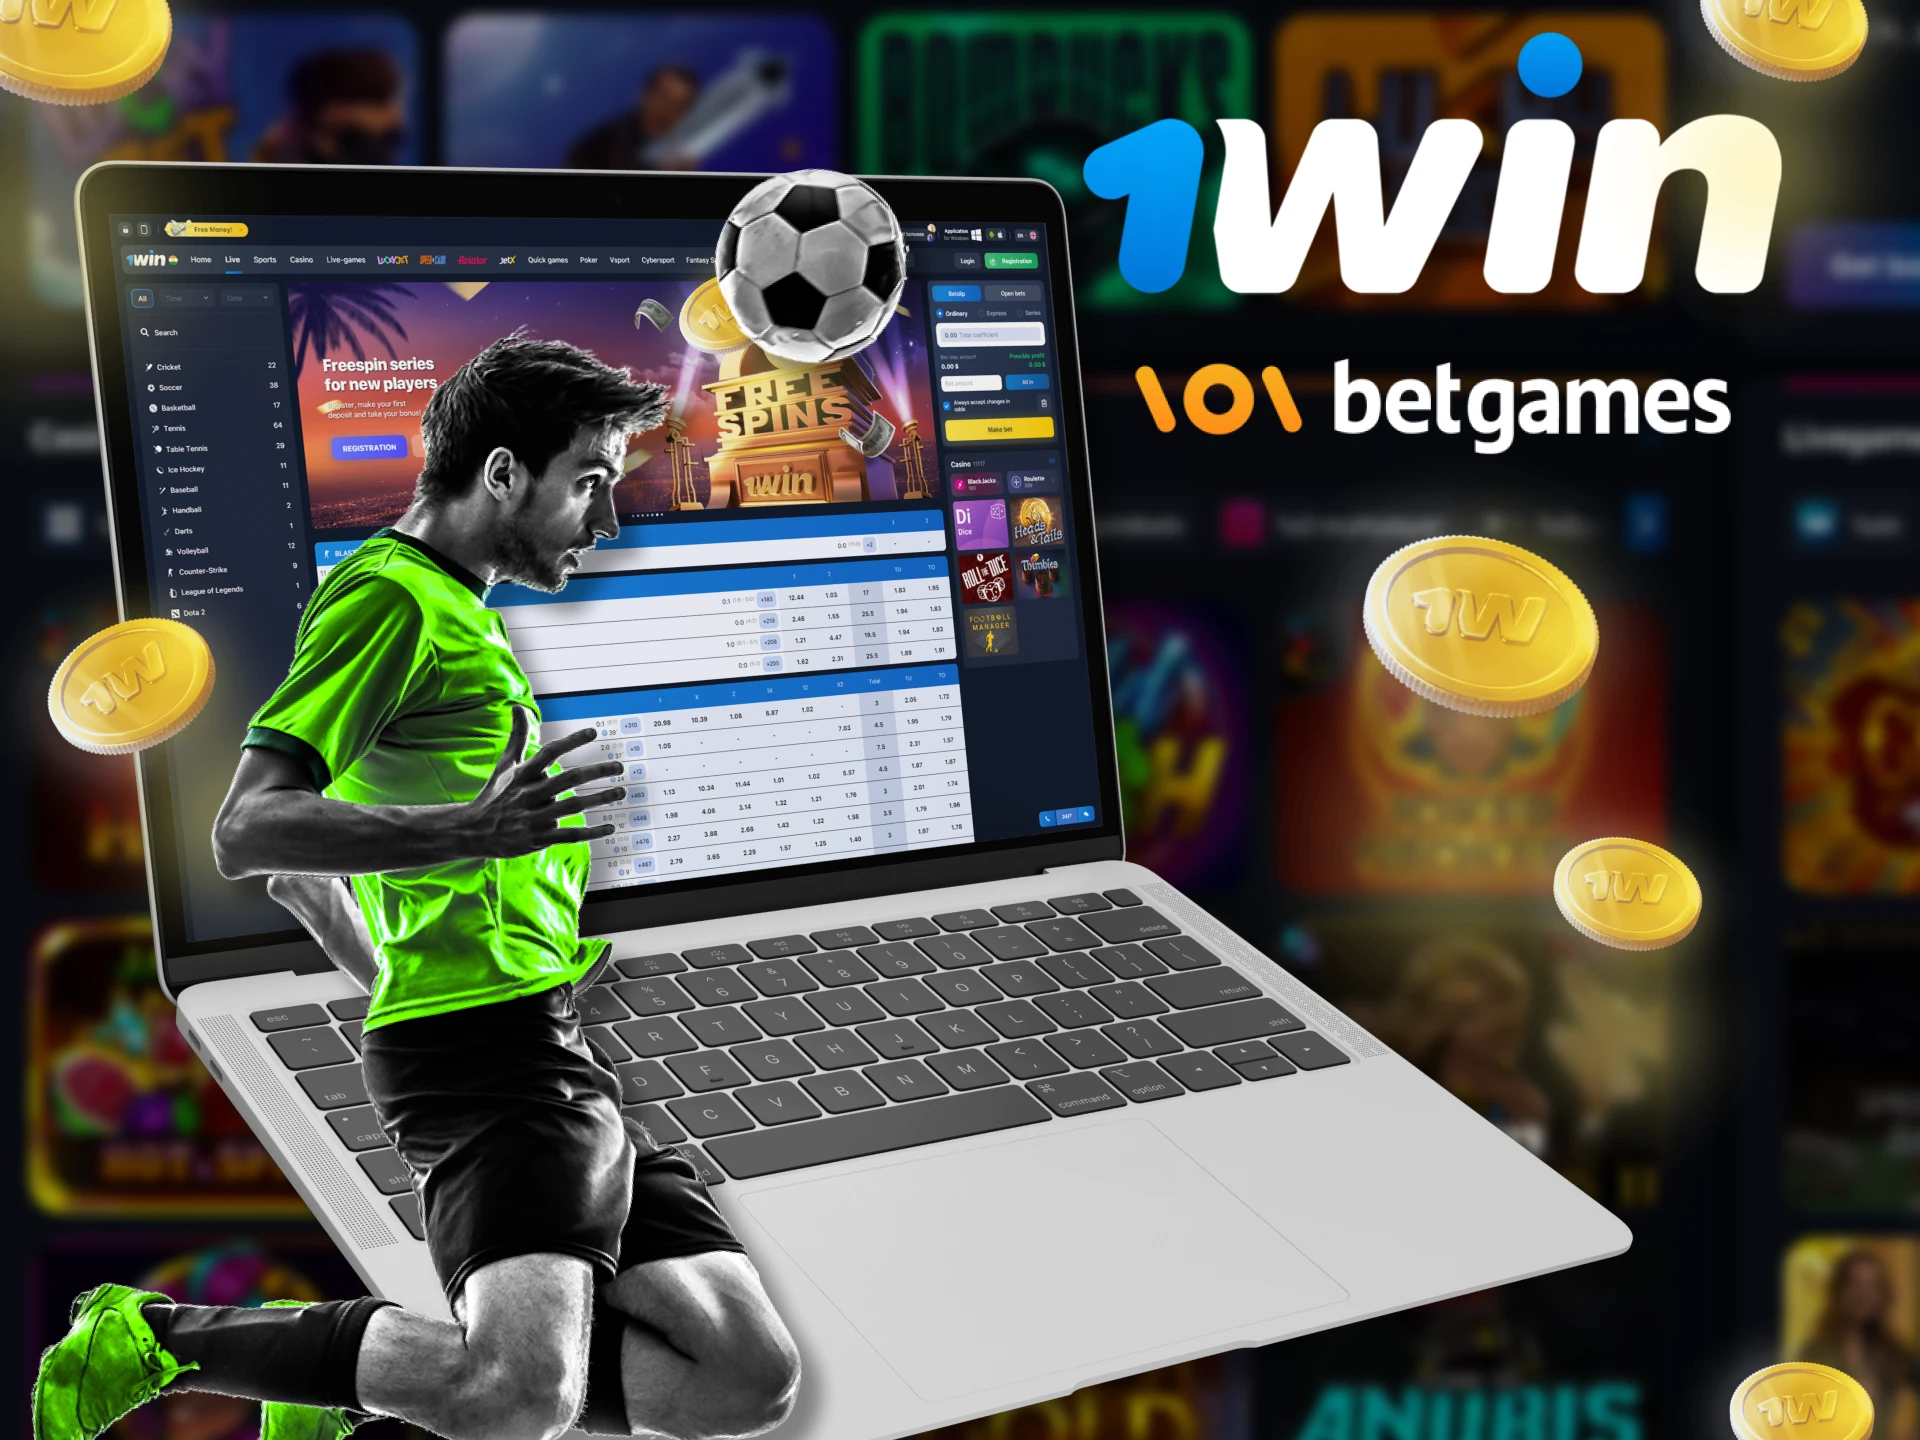 Bet on sports games from BetGames at 1Win.